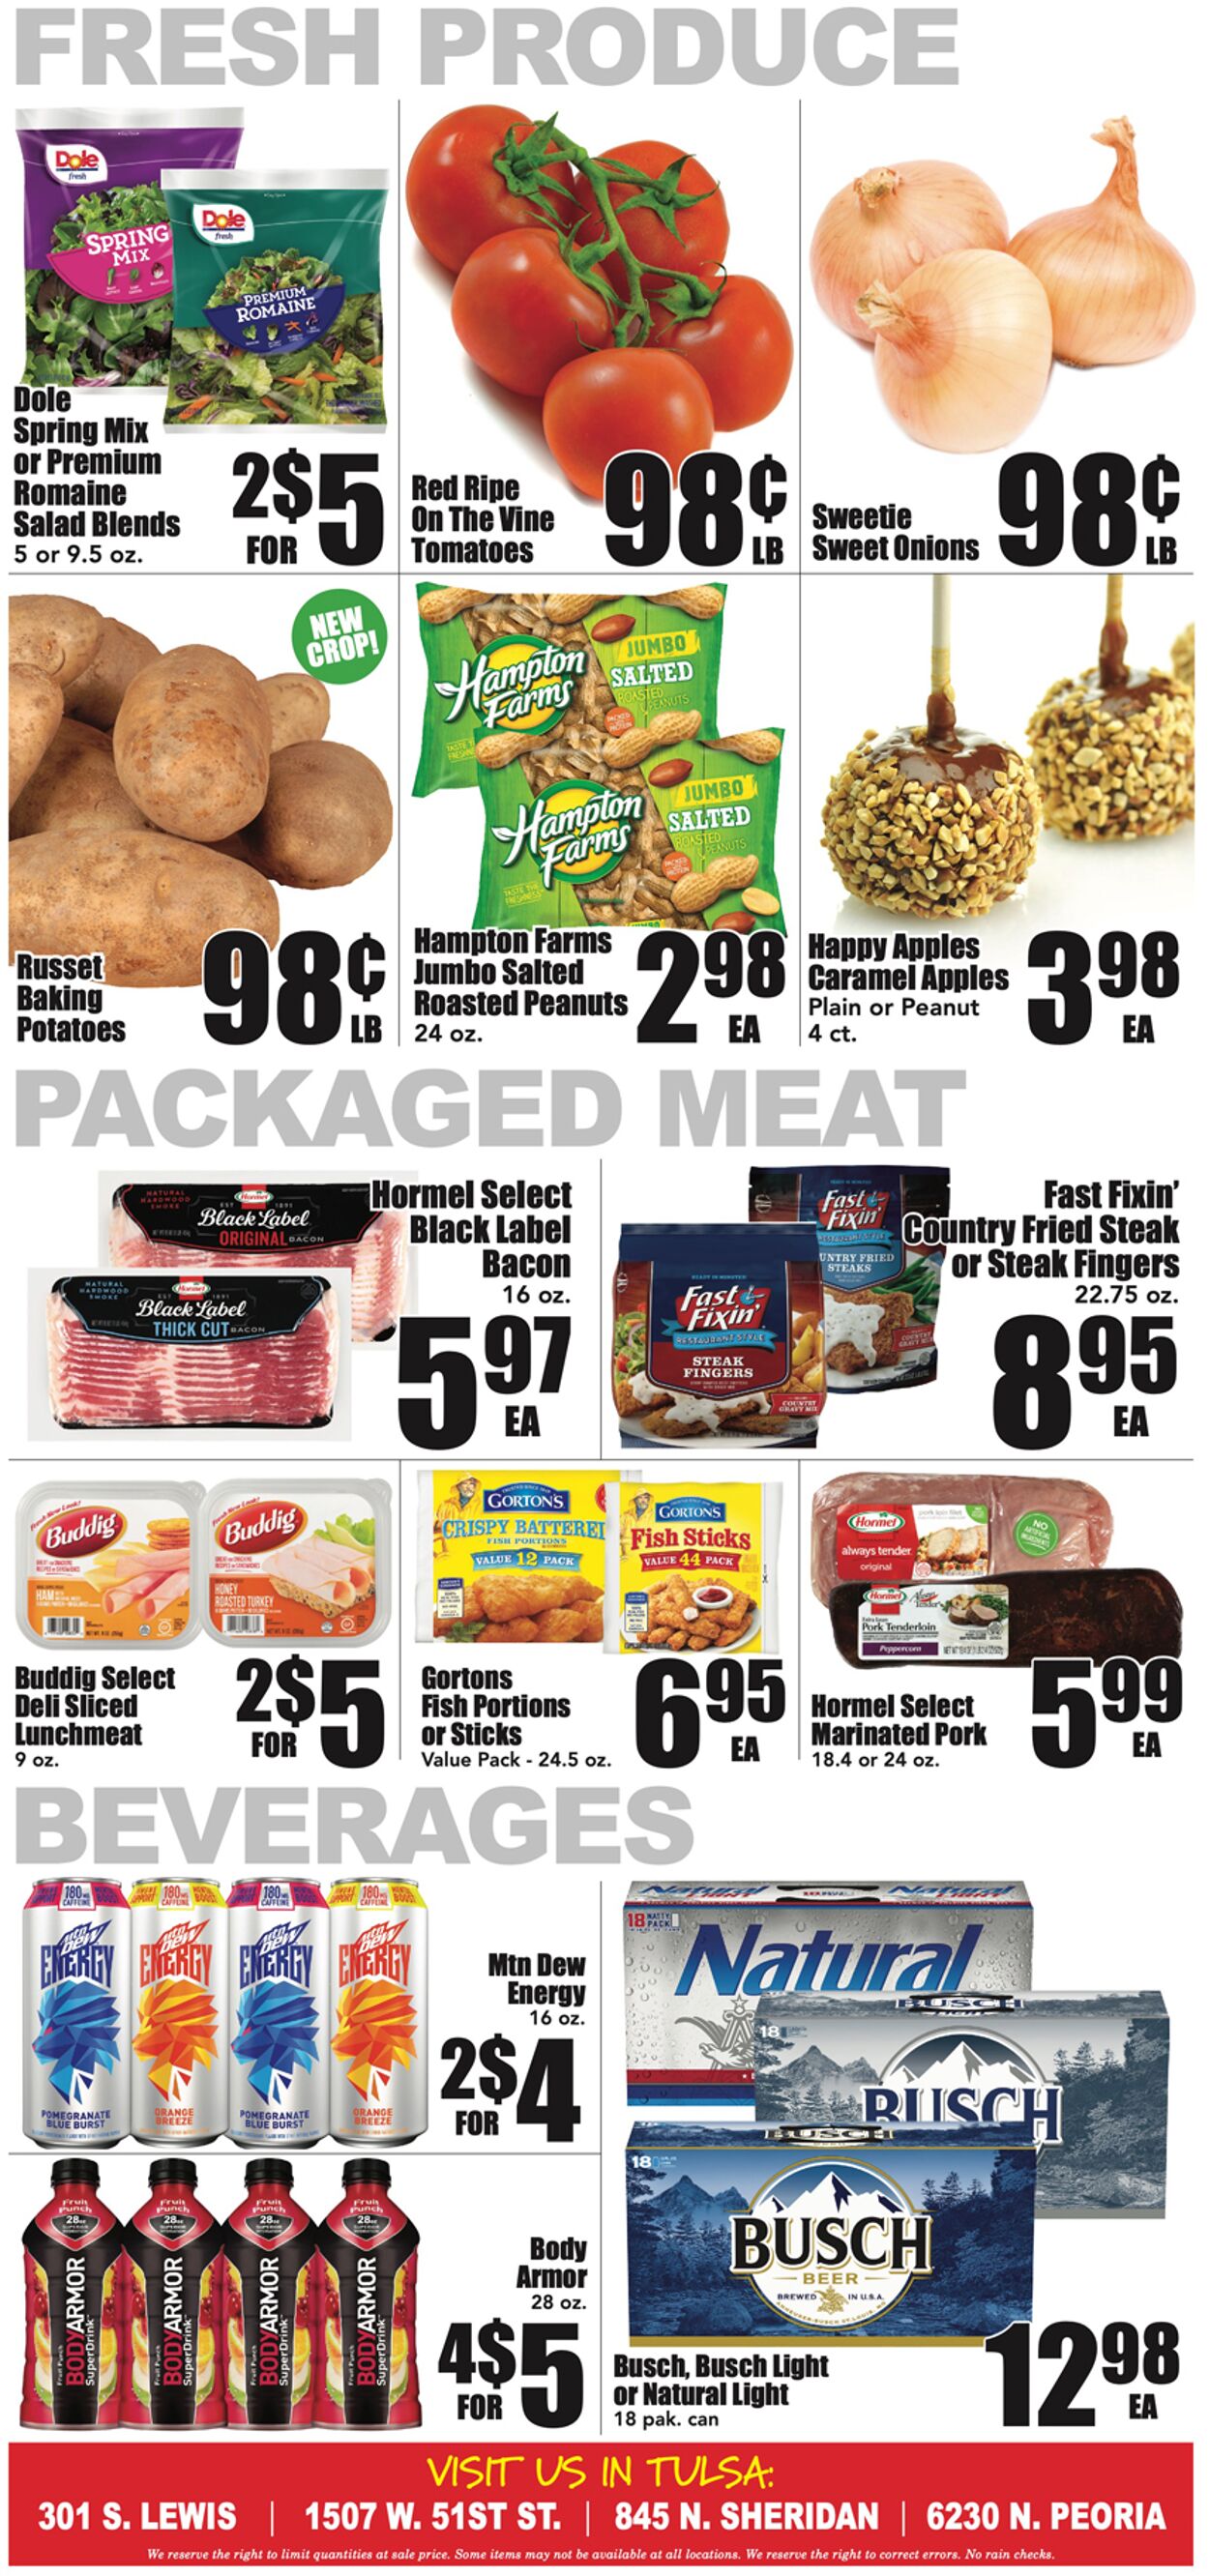 Warehouse Market Ad from 10/19/2022